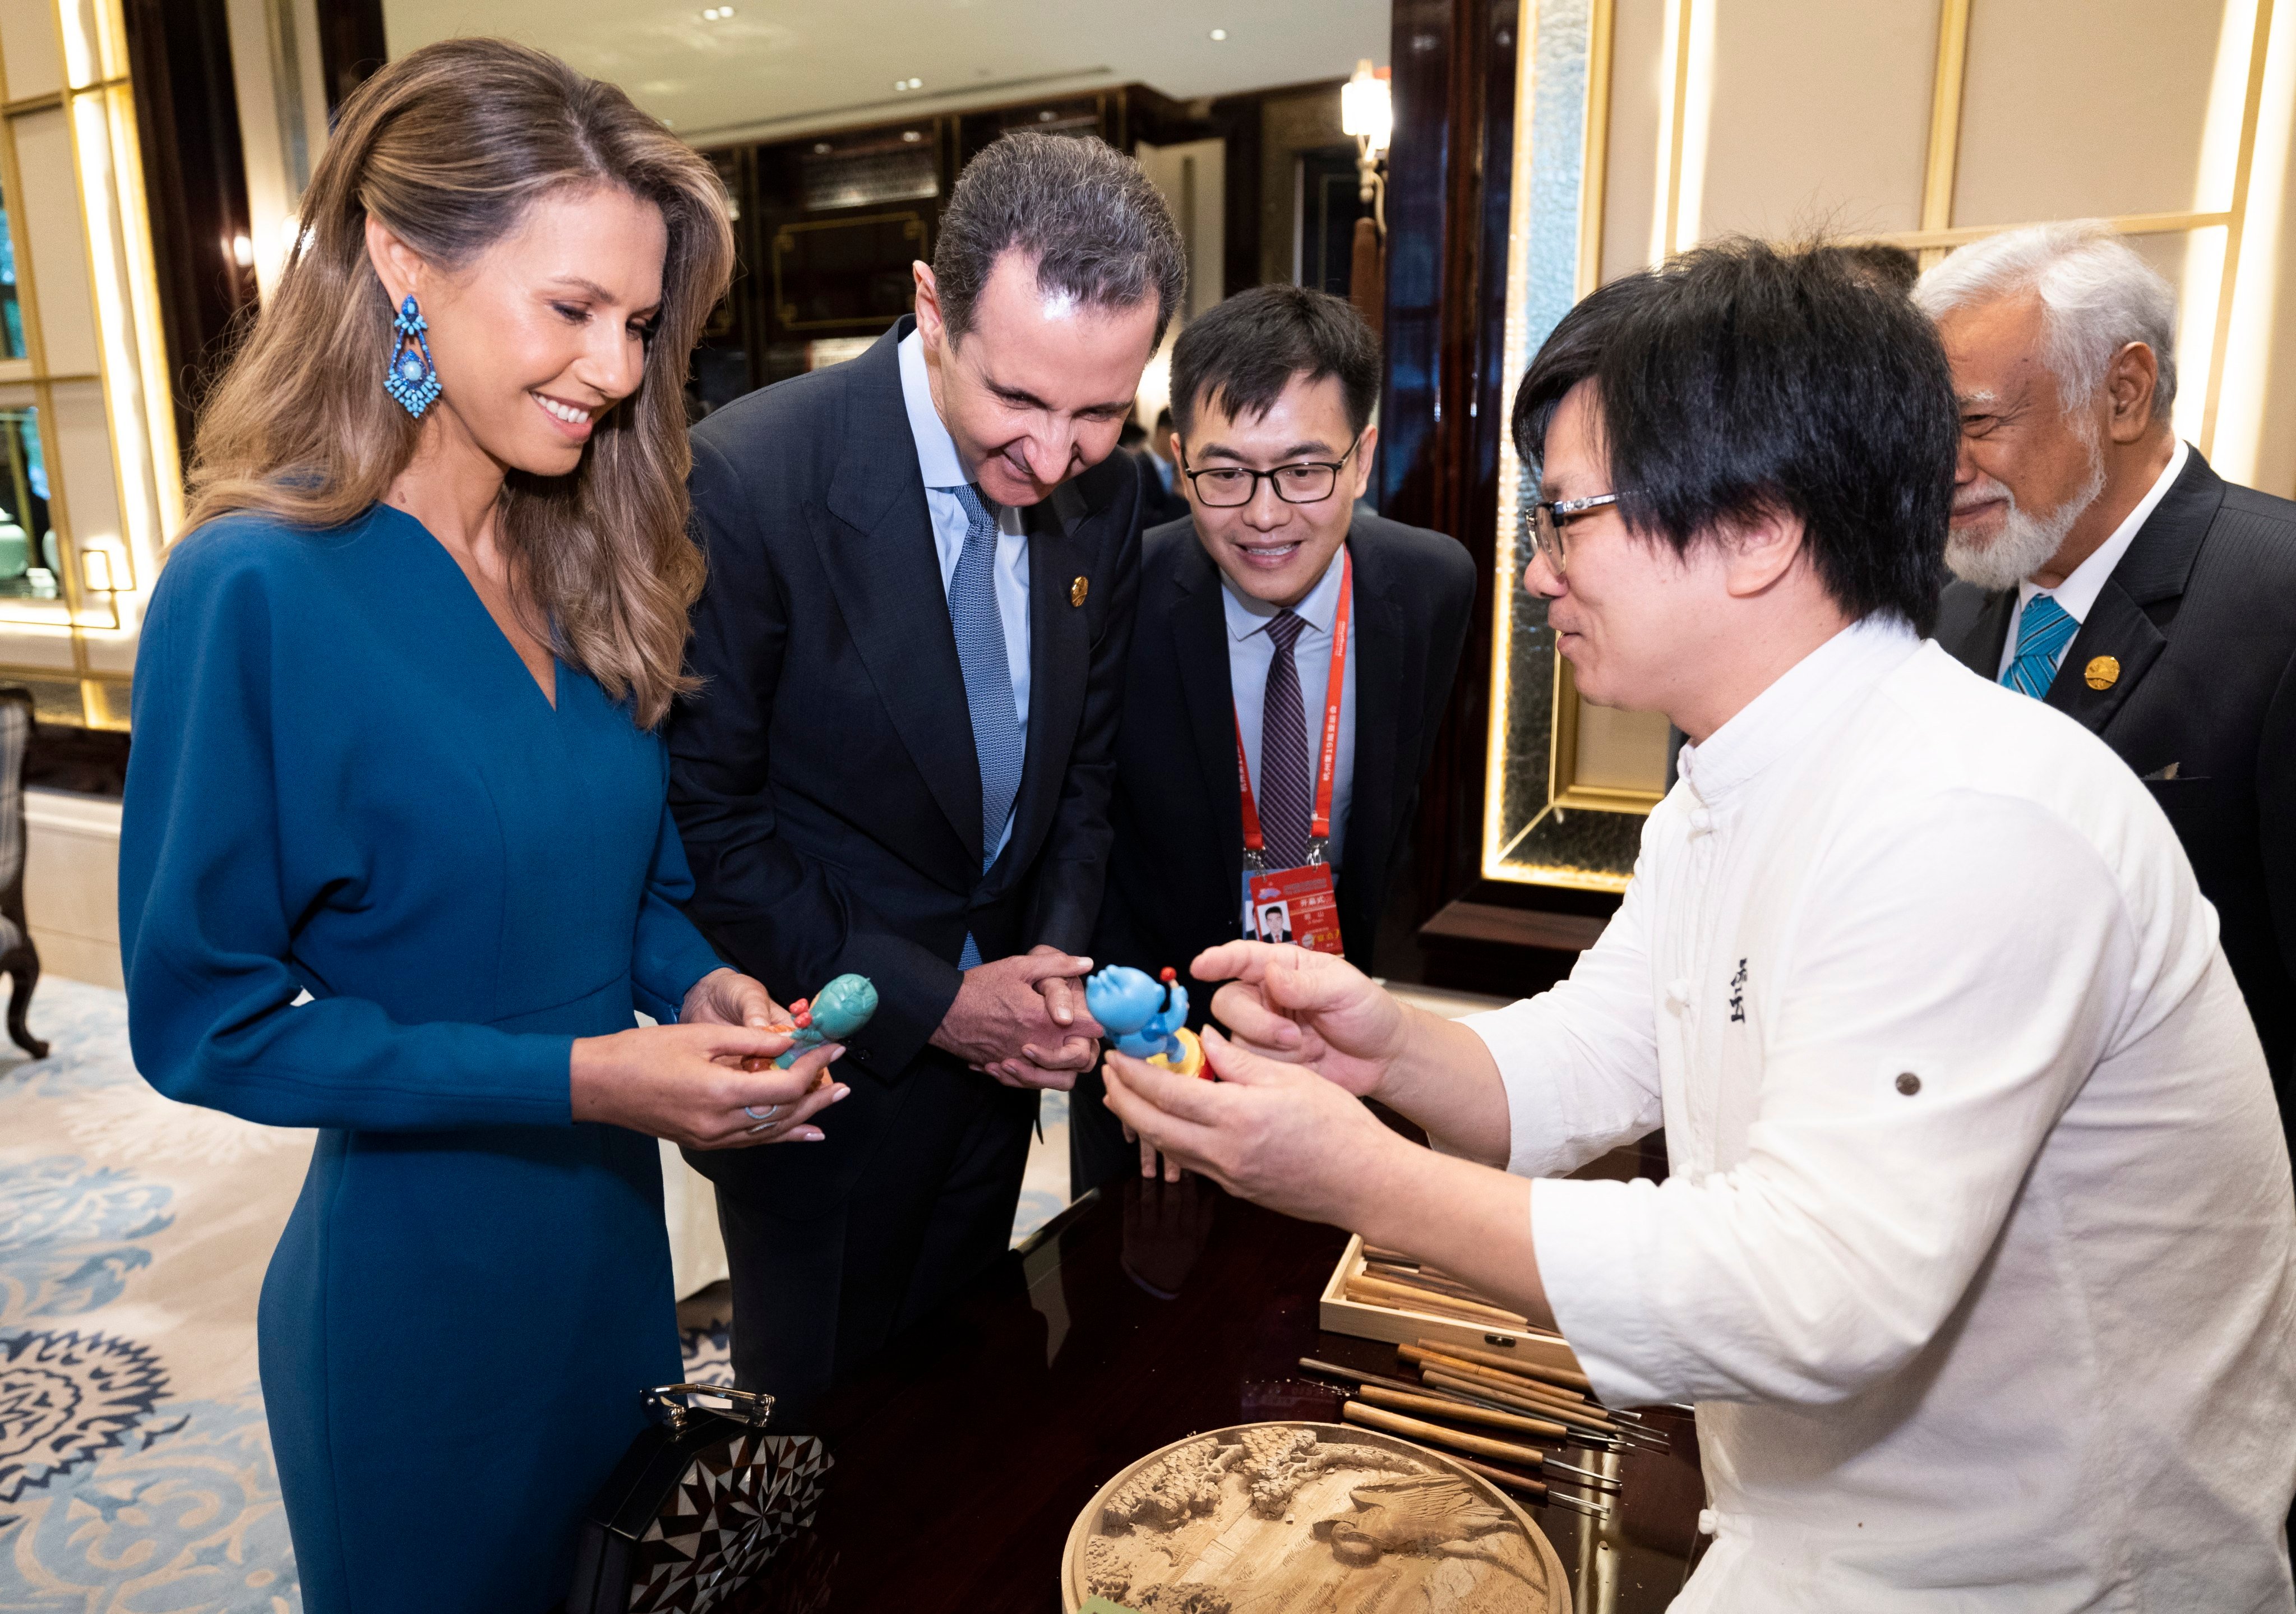 Syria’s first lady, Asma al-Assad, accompanies her husband on his first visit to China since the Syrian civil war started in 2011. Photo: EPA-EFE